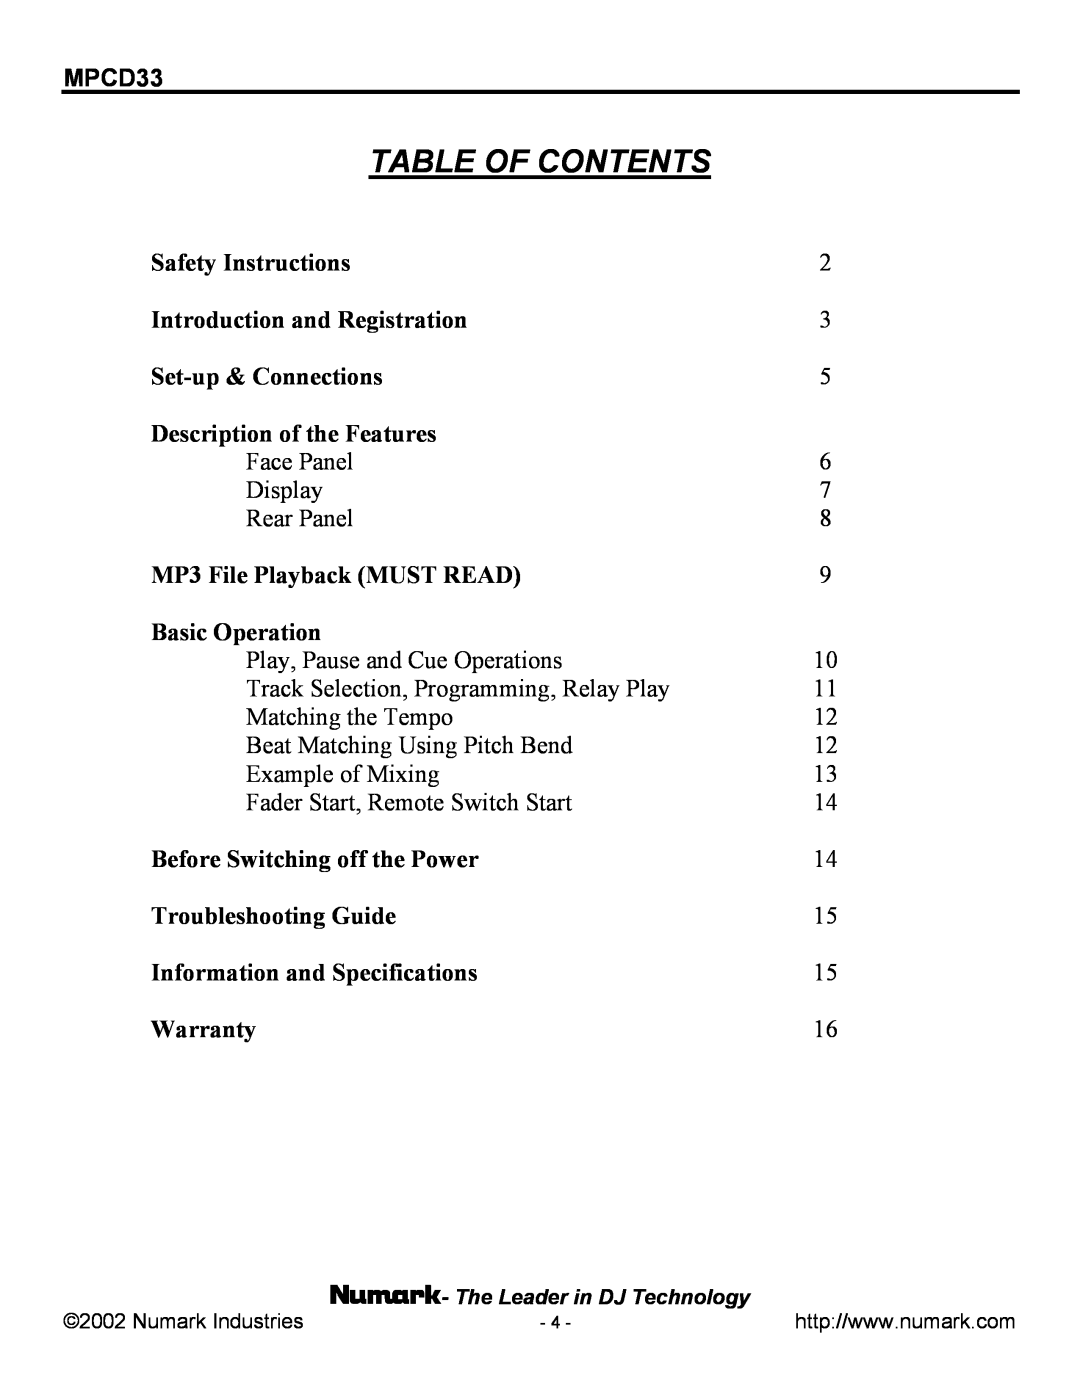 Numark Industries MPCD33 manual Table Of Contents 